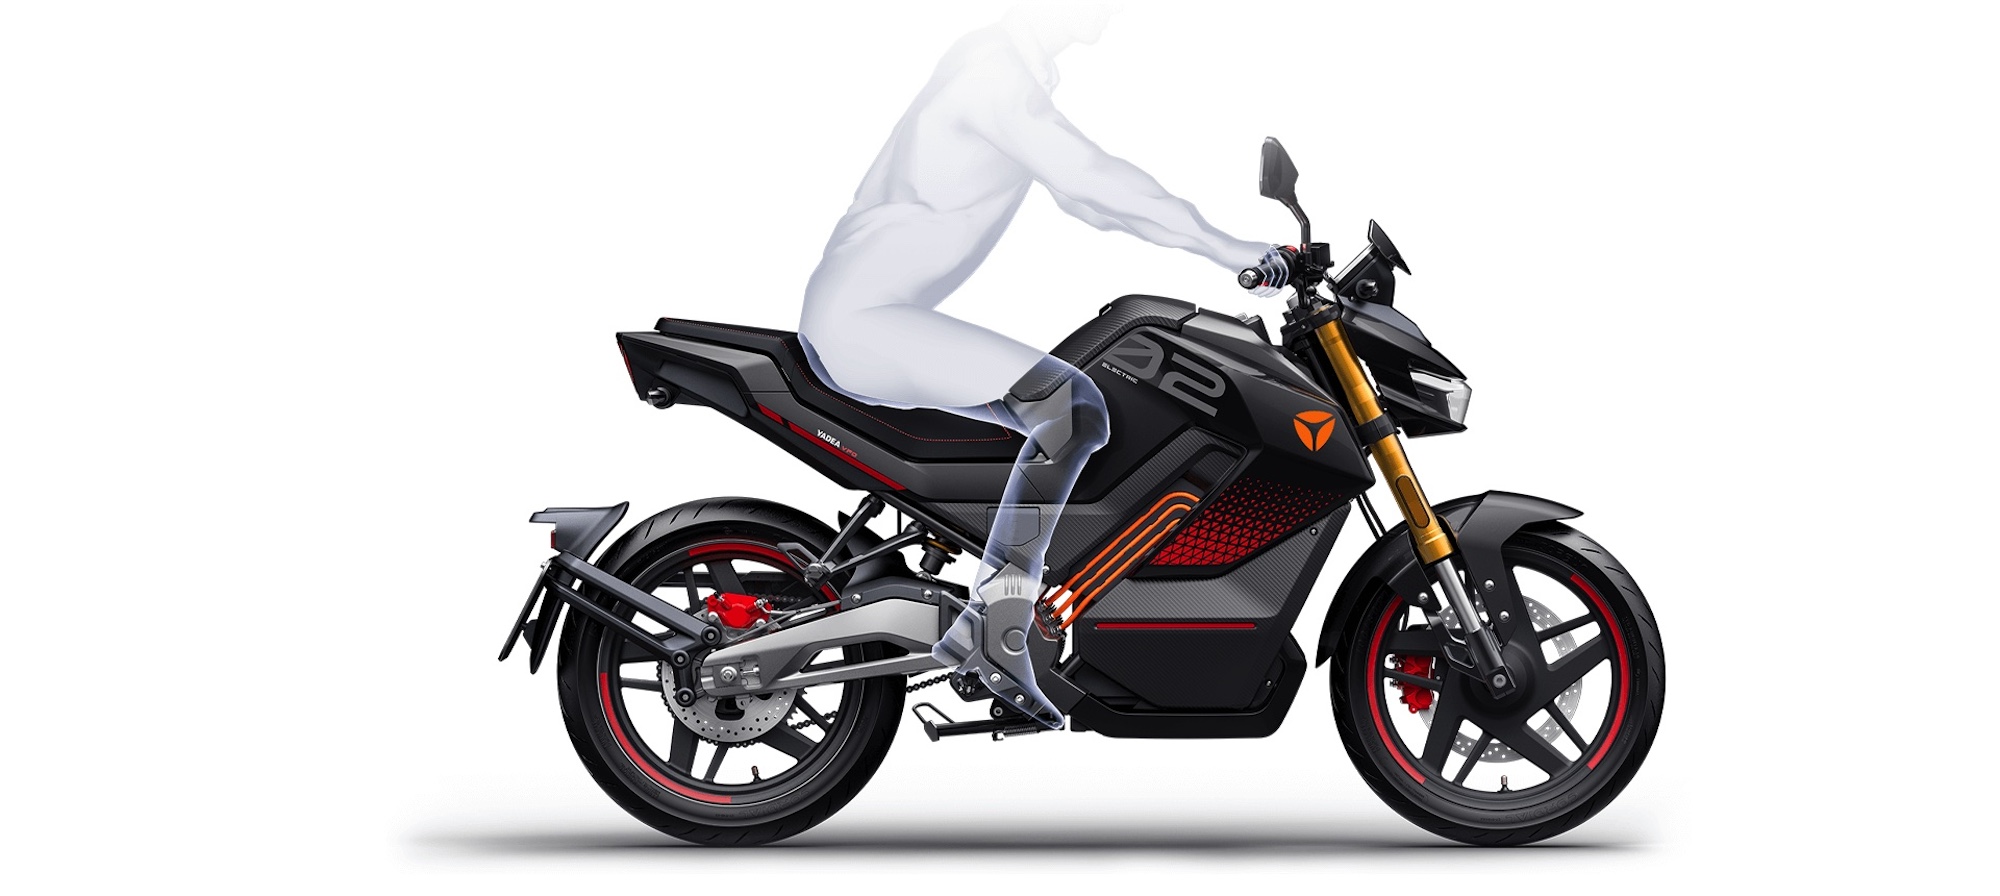 A view of an electric motorcycle from Yadea.